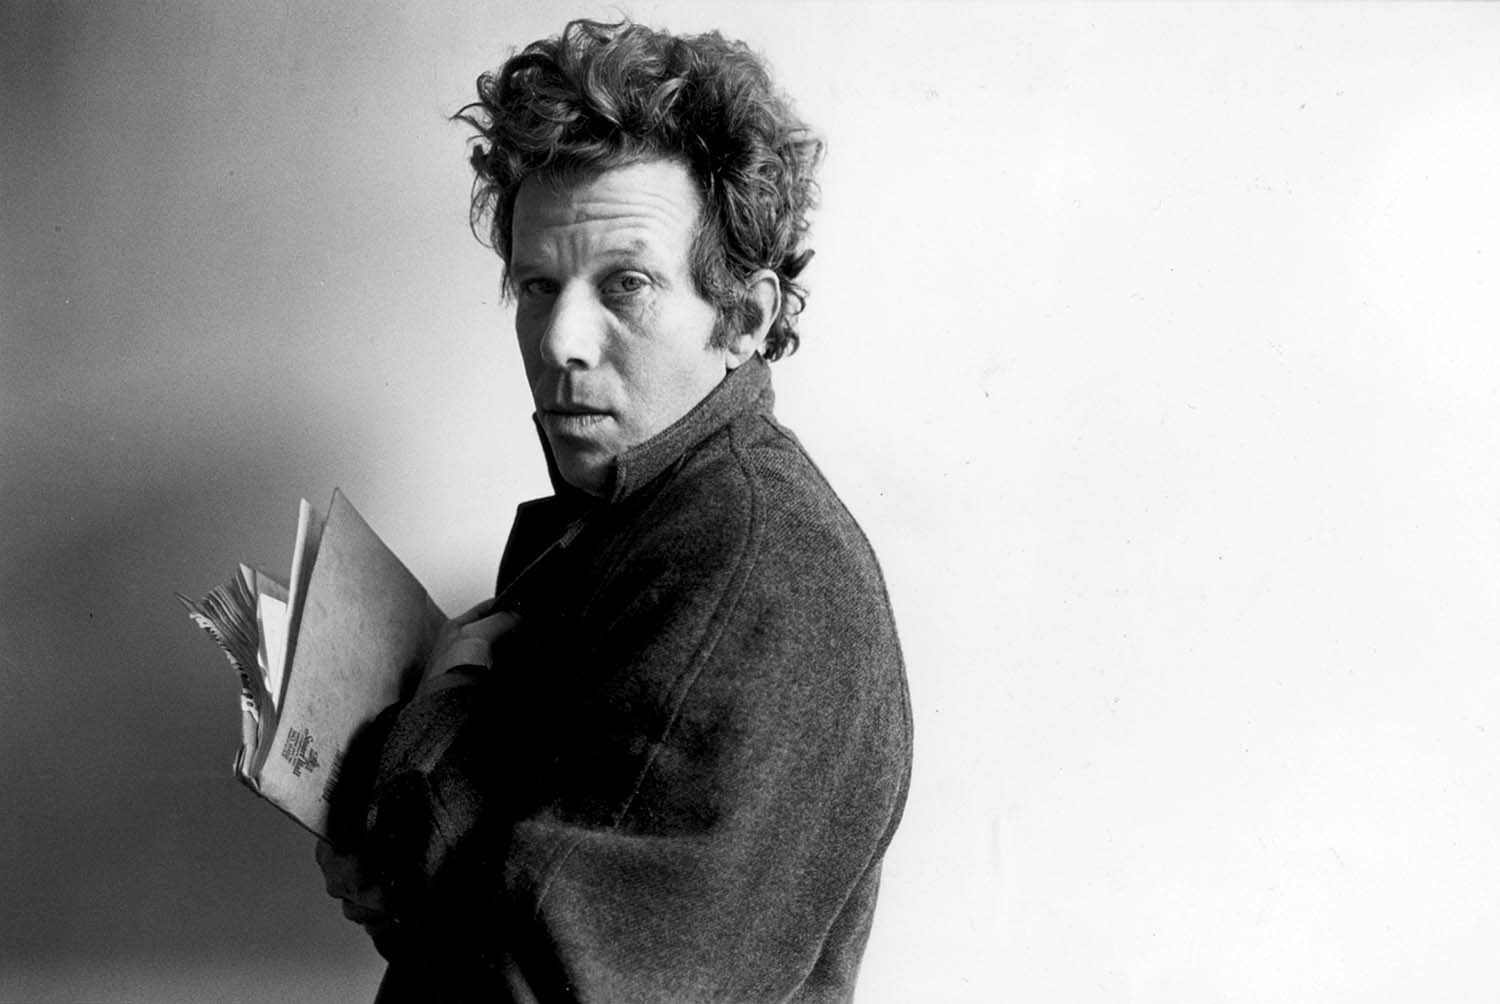 tom waits songwriters singer musicians actor, one person, portrait